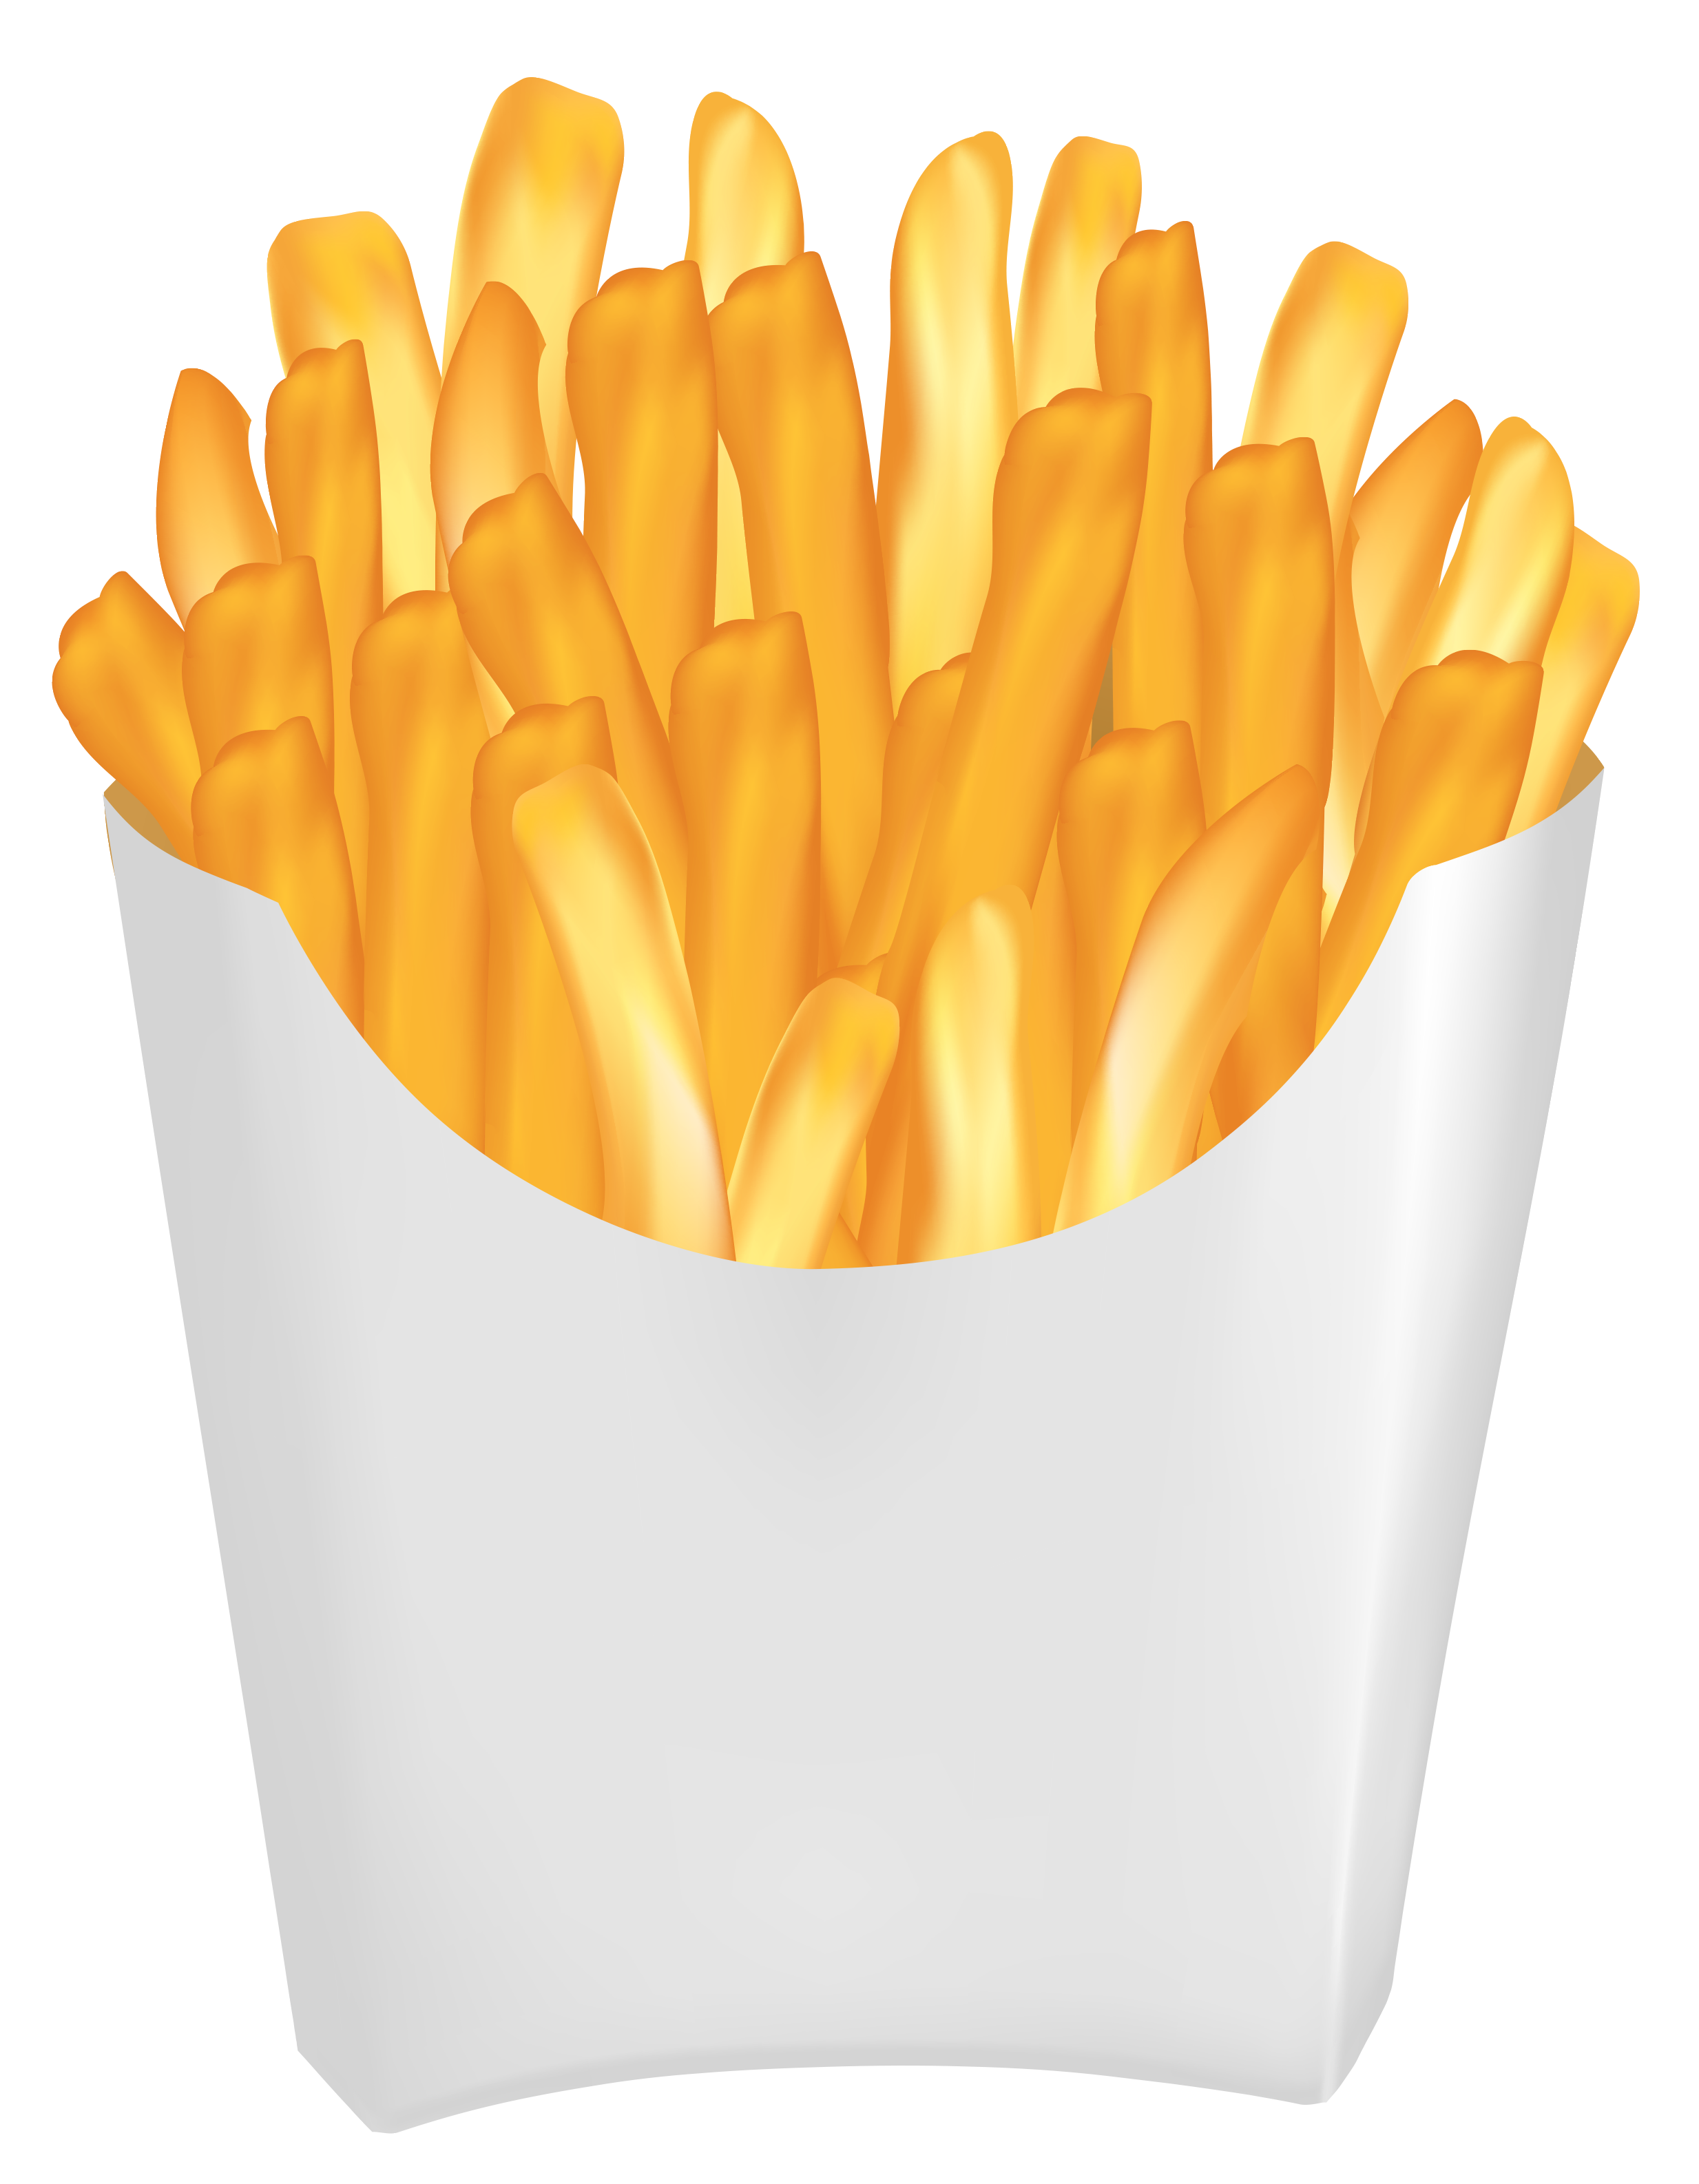 Potato French Fries PNG File